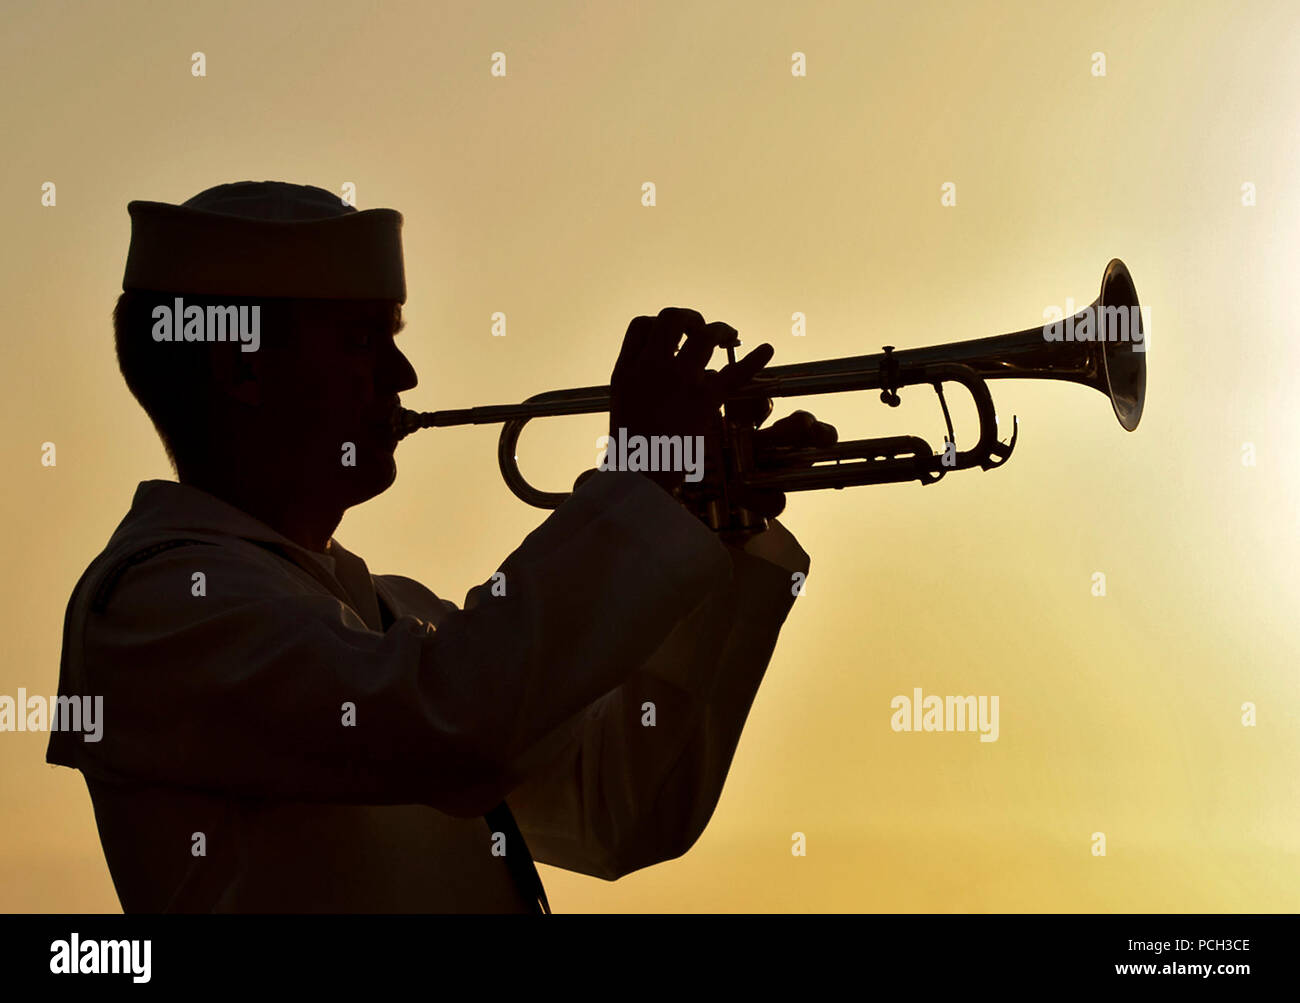 PEARL HARBOR (Dec. 6, 2012) Musician 3rd Class Shelby Tucci, assigned to the Pacific Fleet Band, plays Taps during a sunset ceremony at the USS Utah Memorial, Joint Base Pearl Harbor-Hickam. Utah was sunk during the surprise Japanese attacks on Pearl Harbor on Dec. 7, 1941. Stock Photo